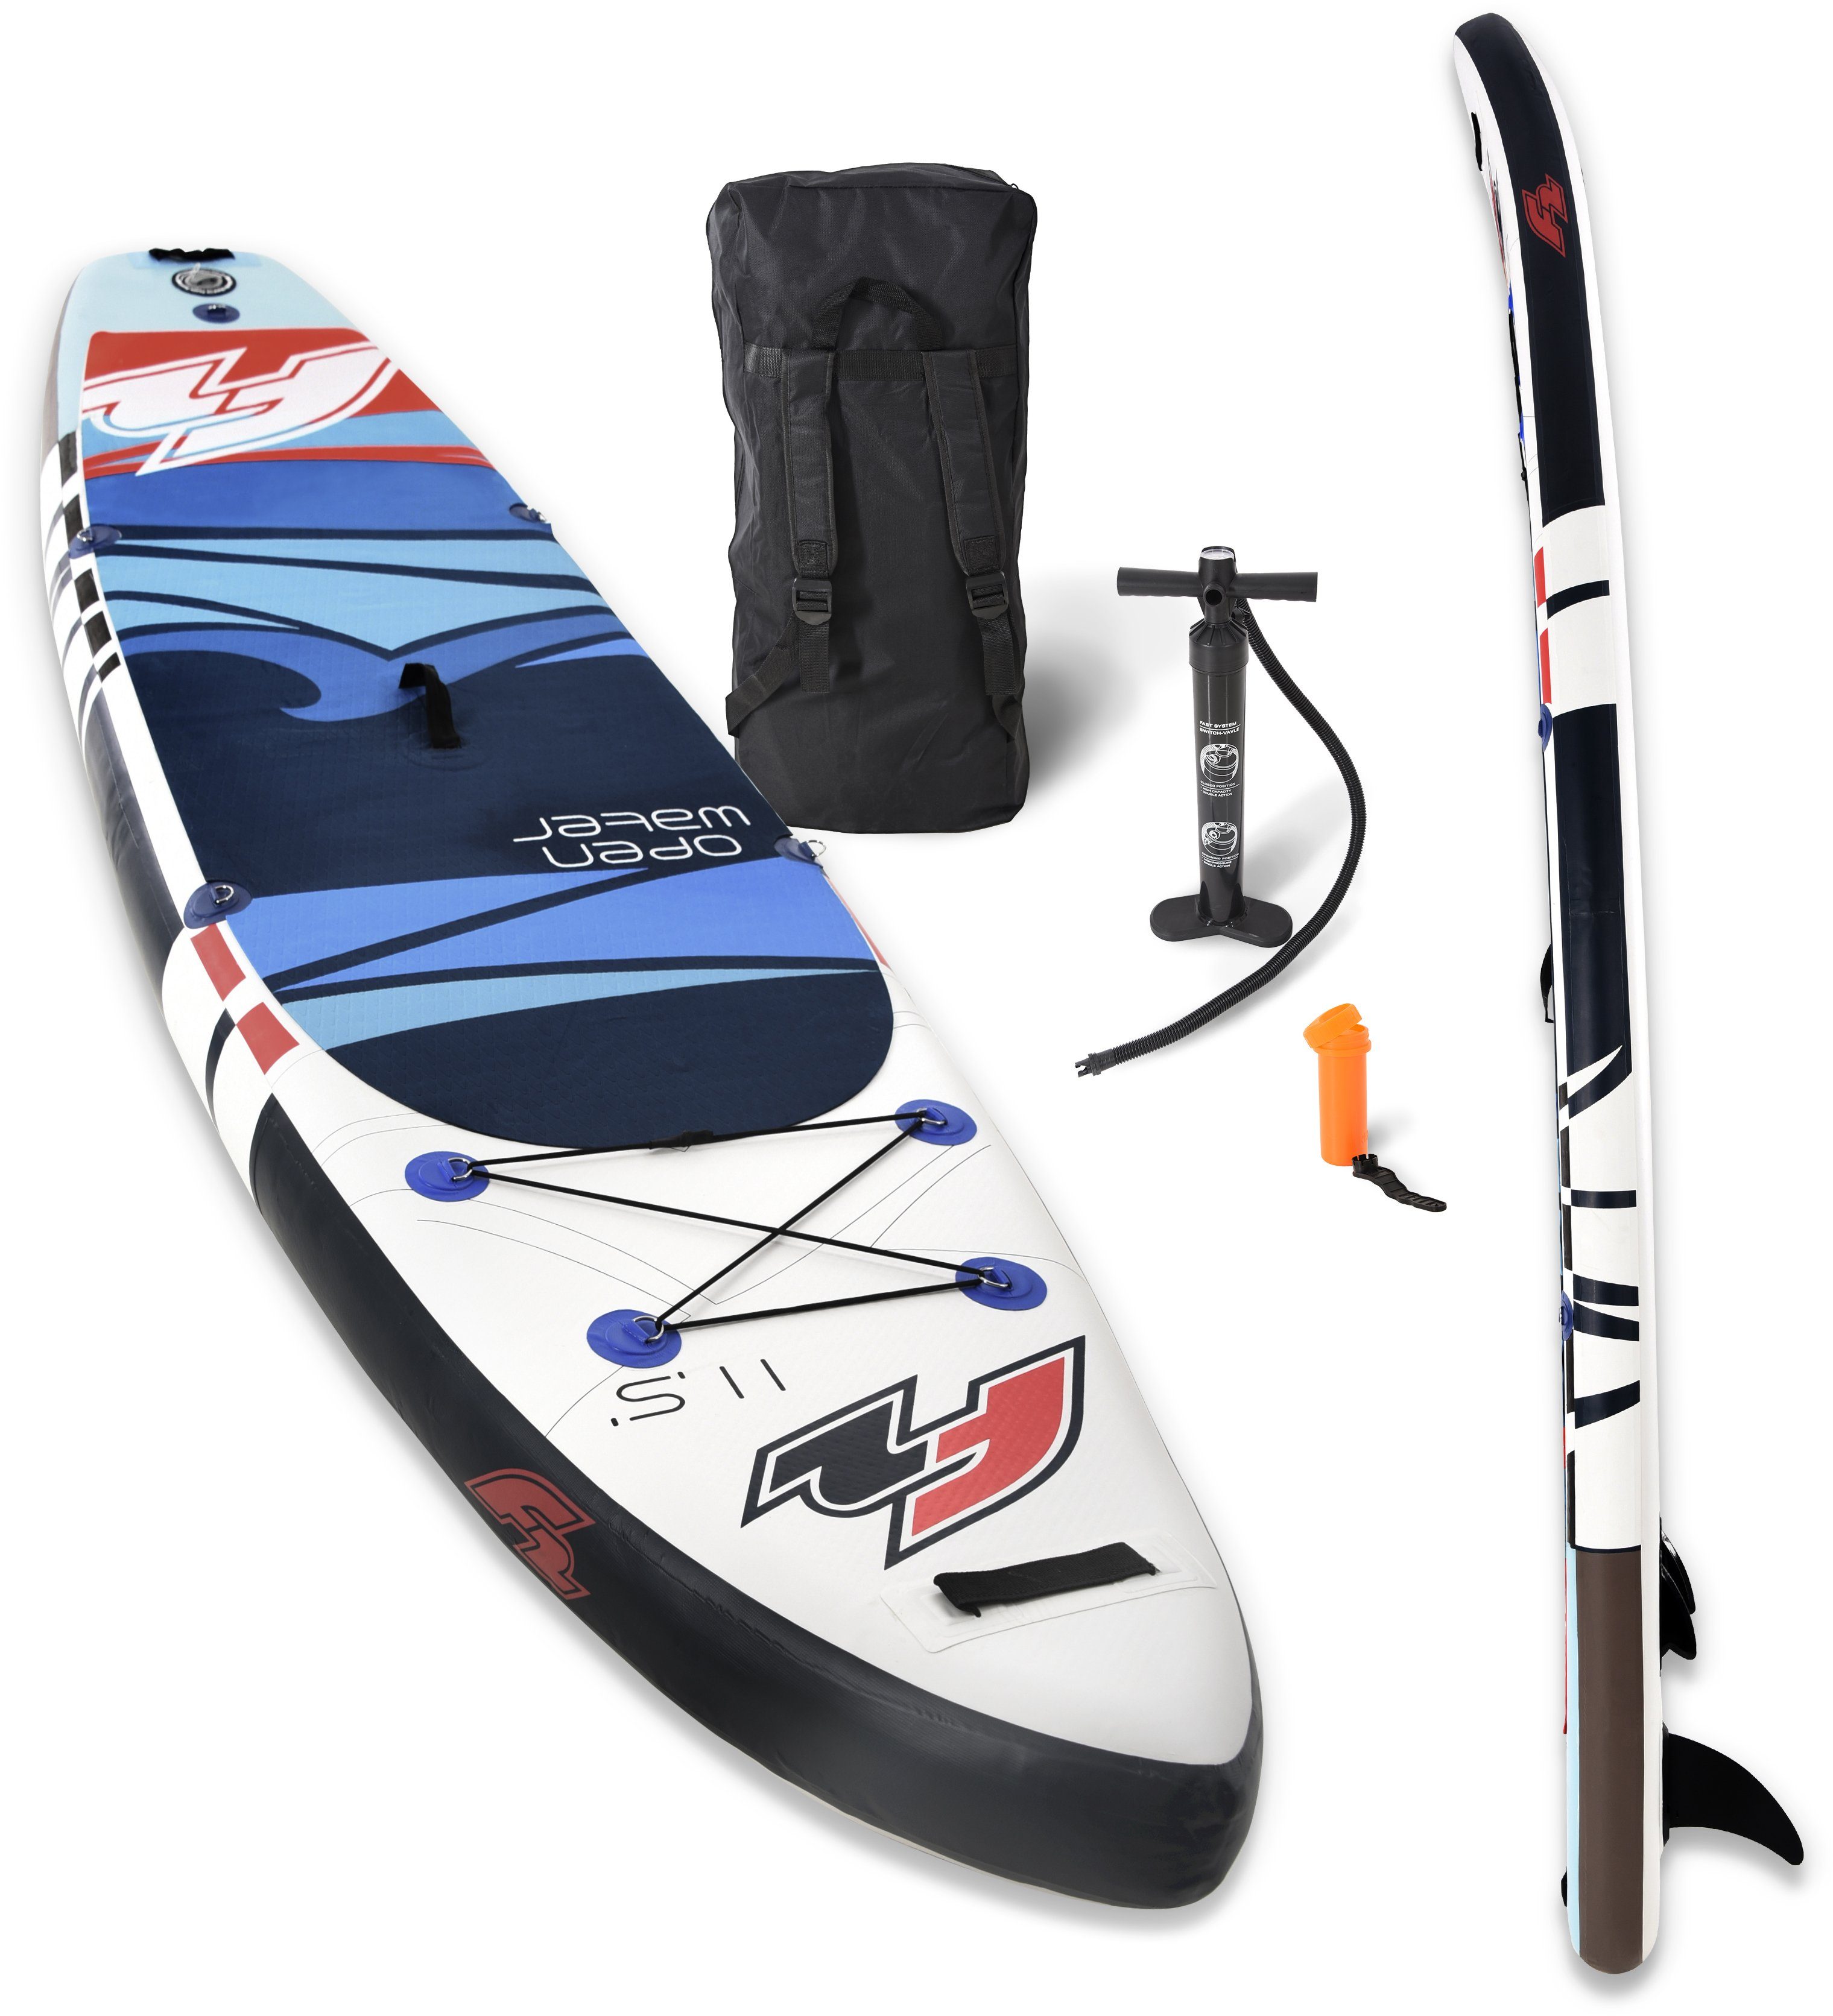 F2 ohne Paddel Open SUP-Board Water